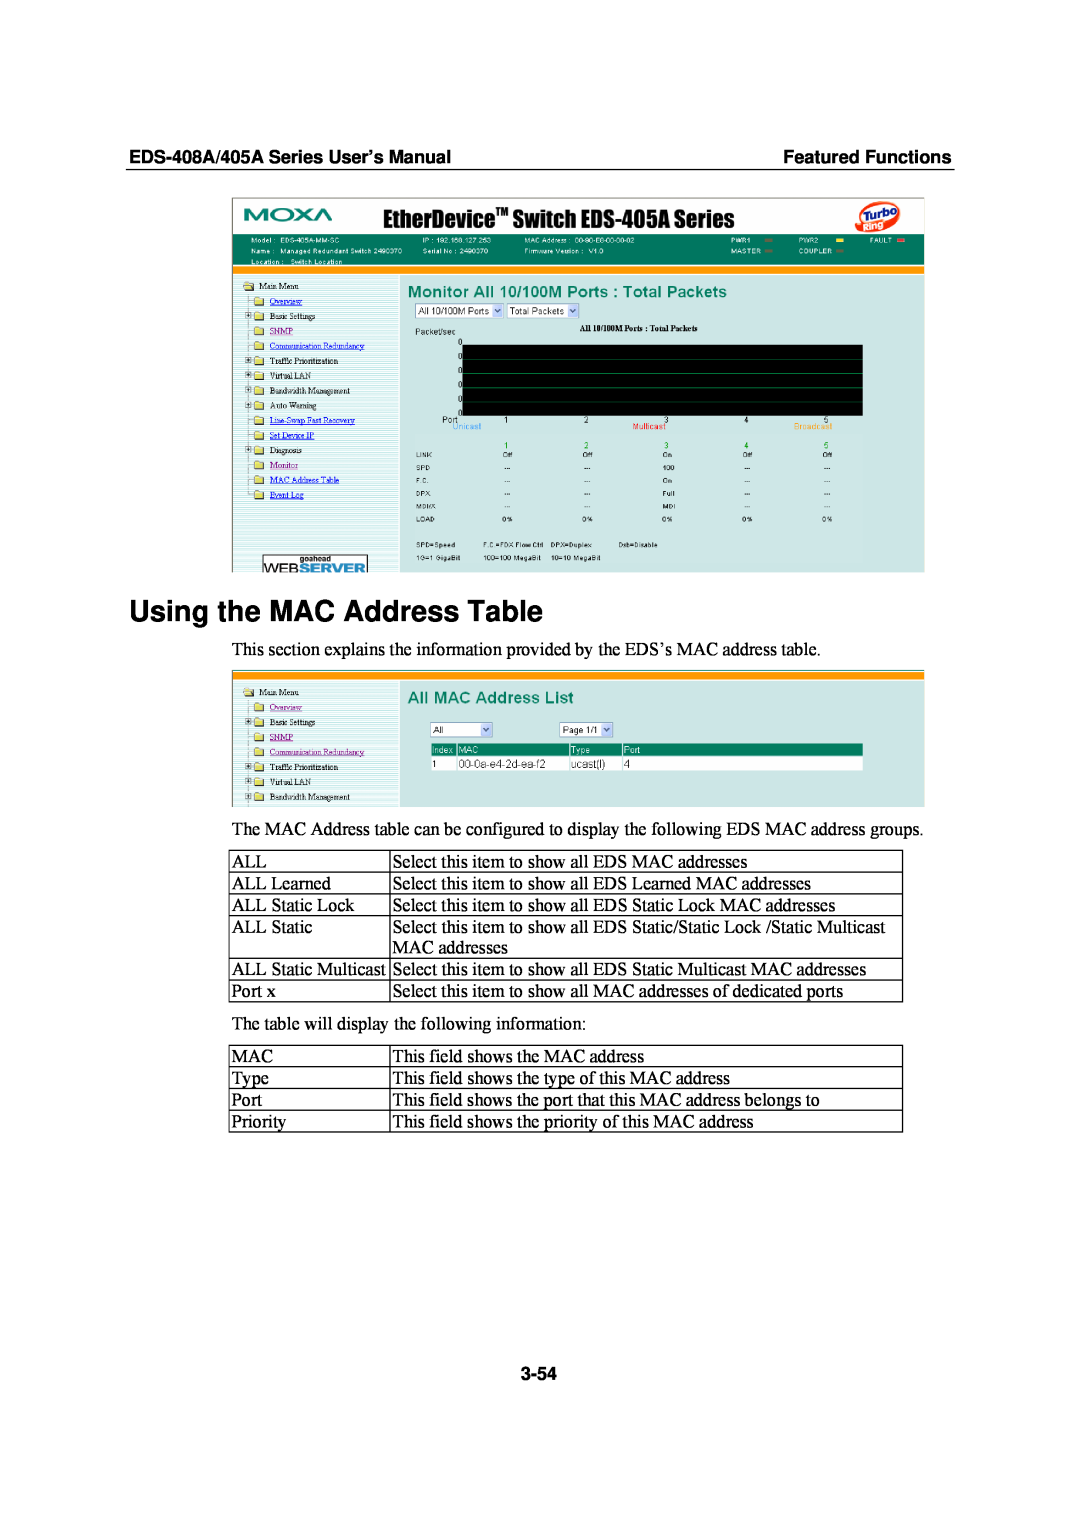 Moxa Technologies EDS-405A Using the MAC Address Table, 3-54, EDS-408A/405A Series User’s Manual, Featured Functions 